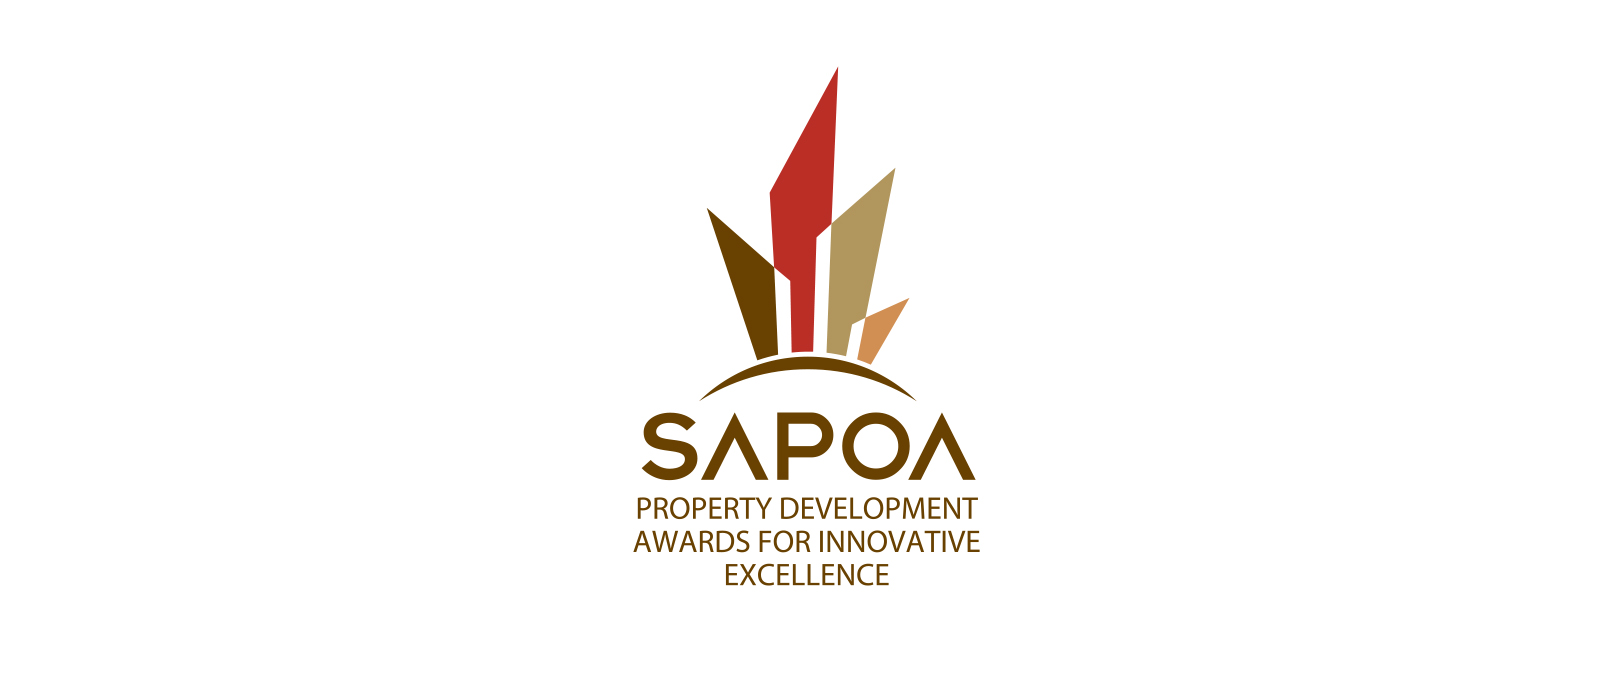 dhk wins three SAPOA Awards for Innovative Excellence including Overall Heritage Award